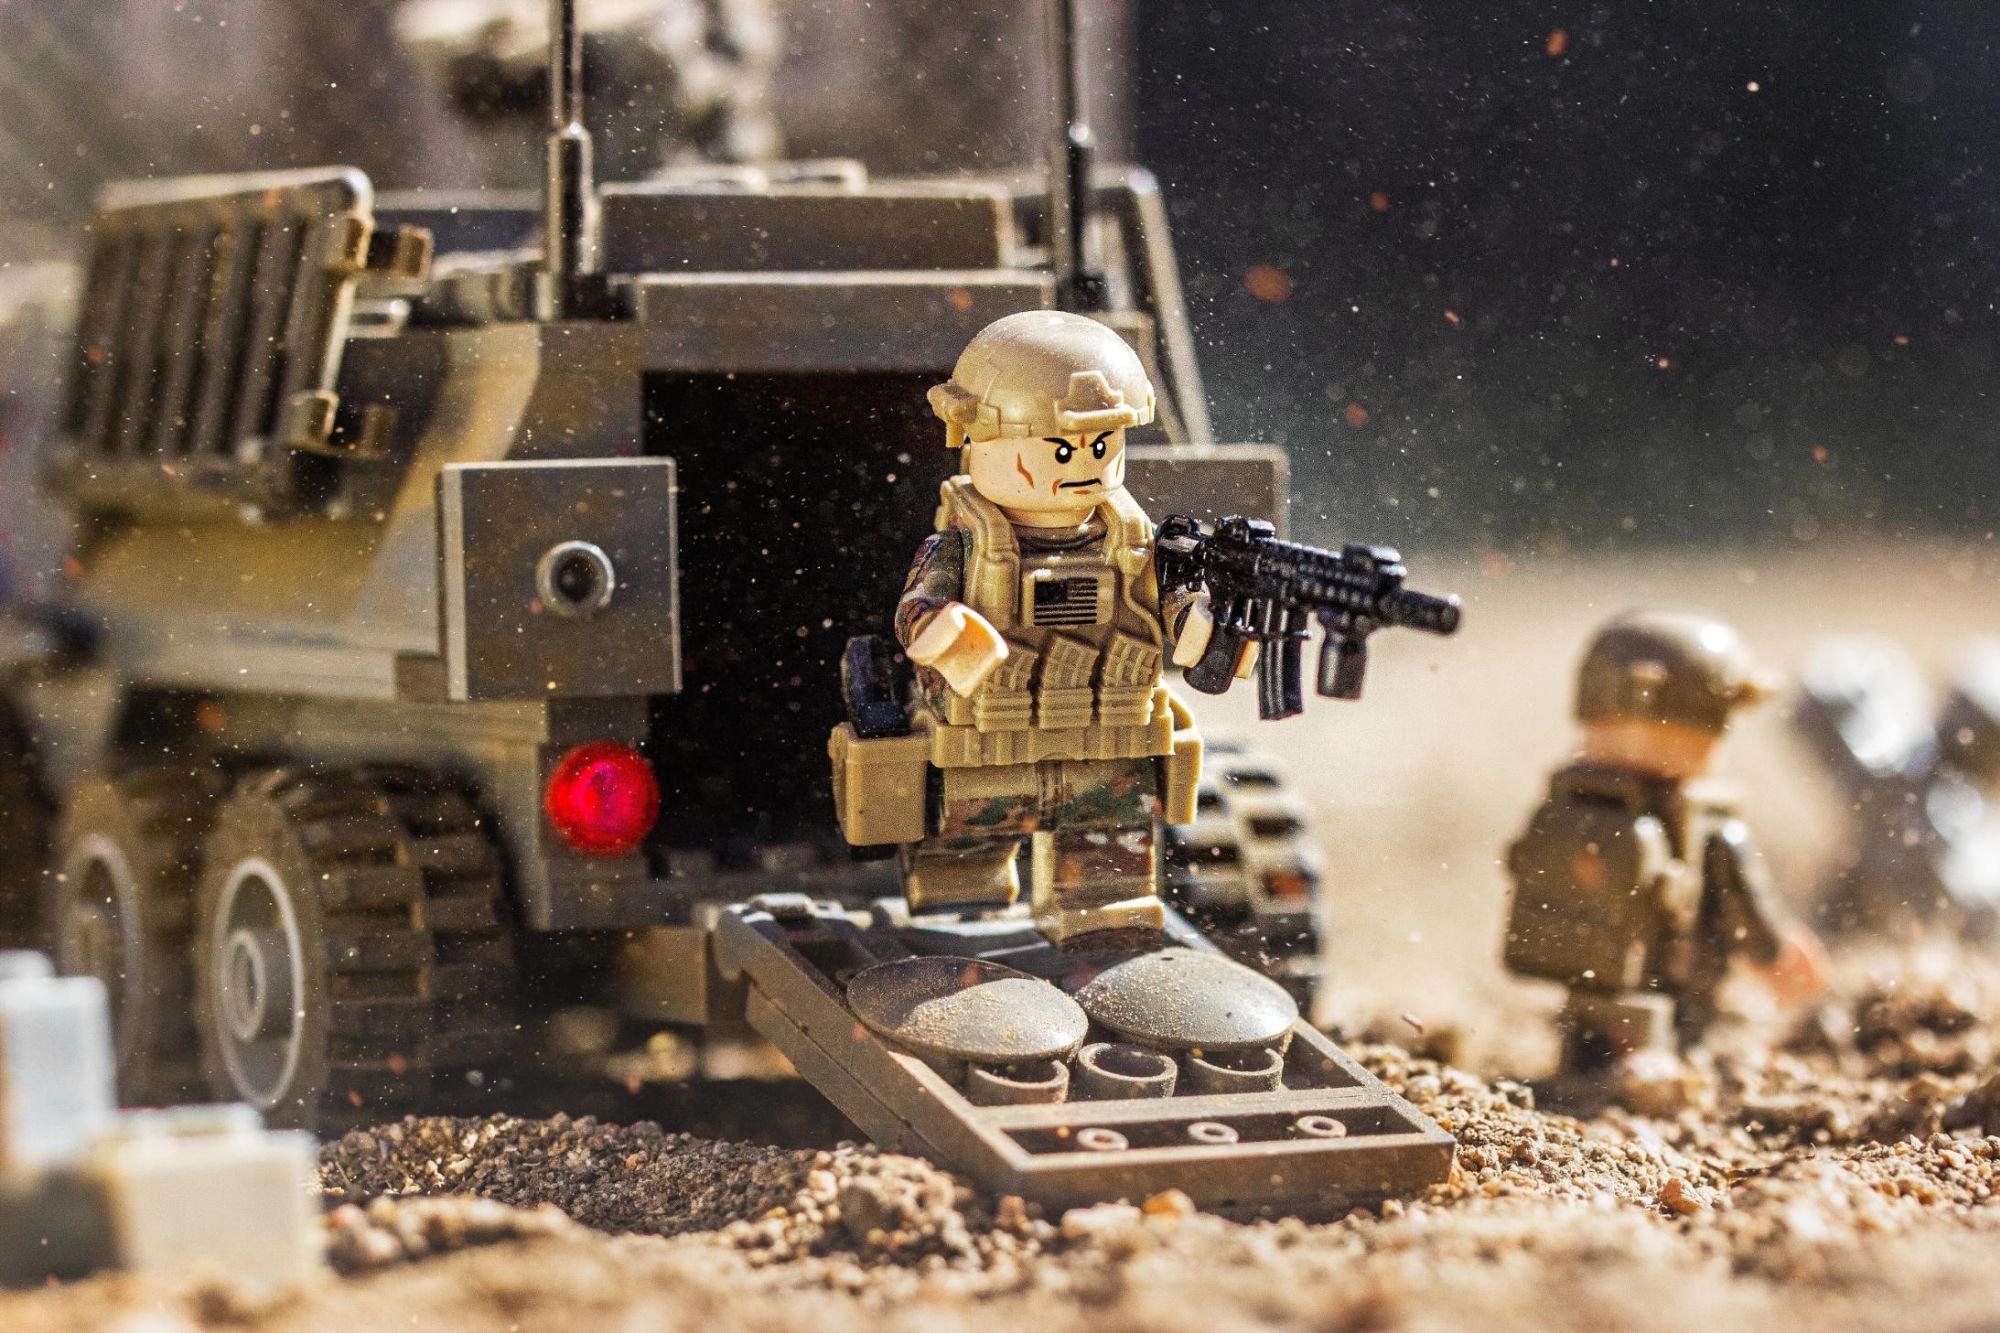 LEGO won't make modern war machines, but others are picking up the